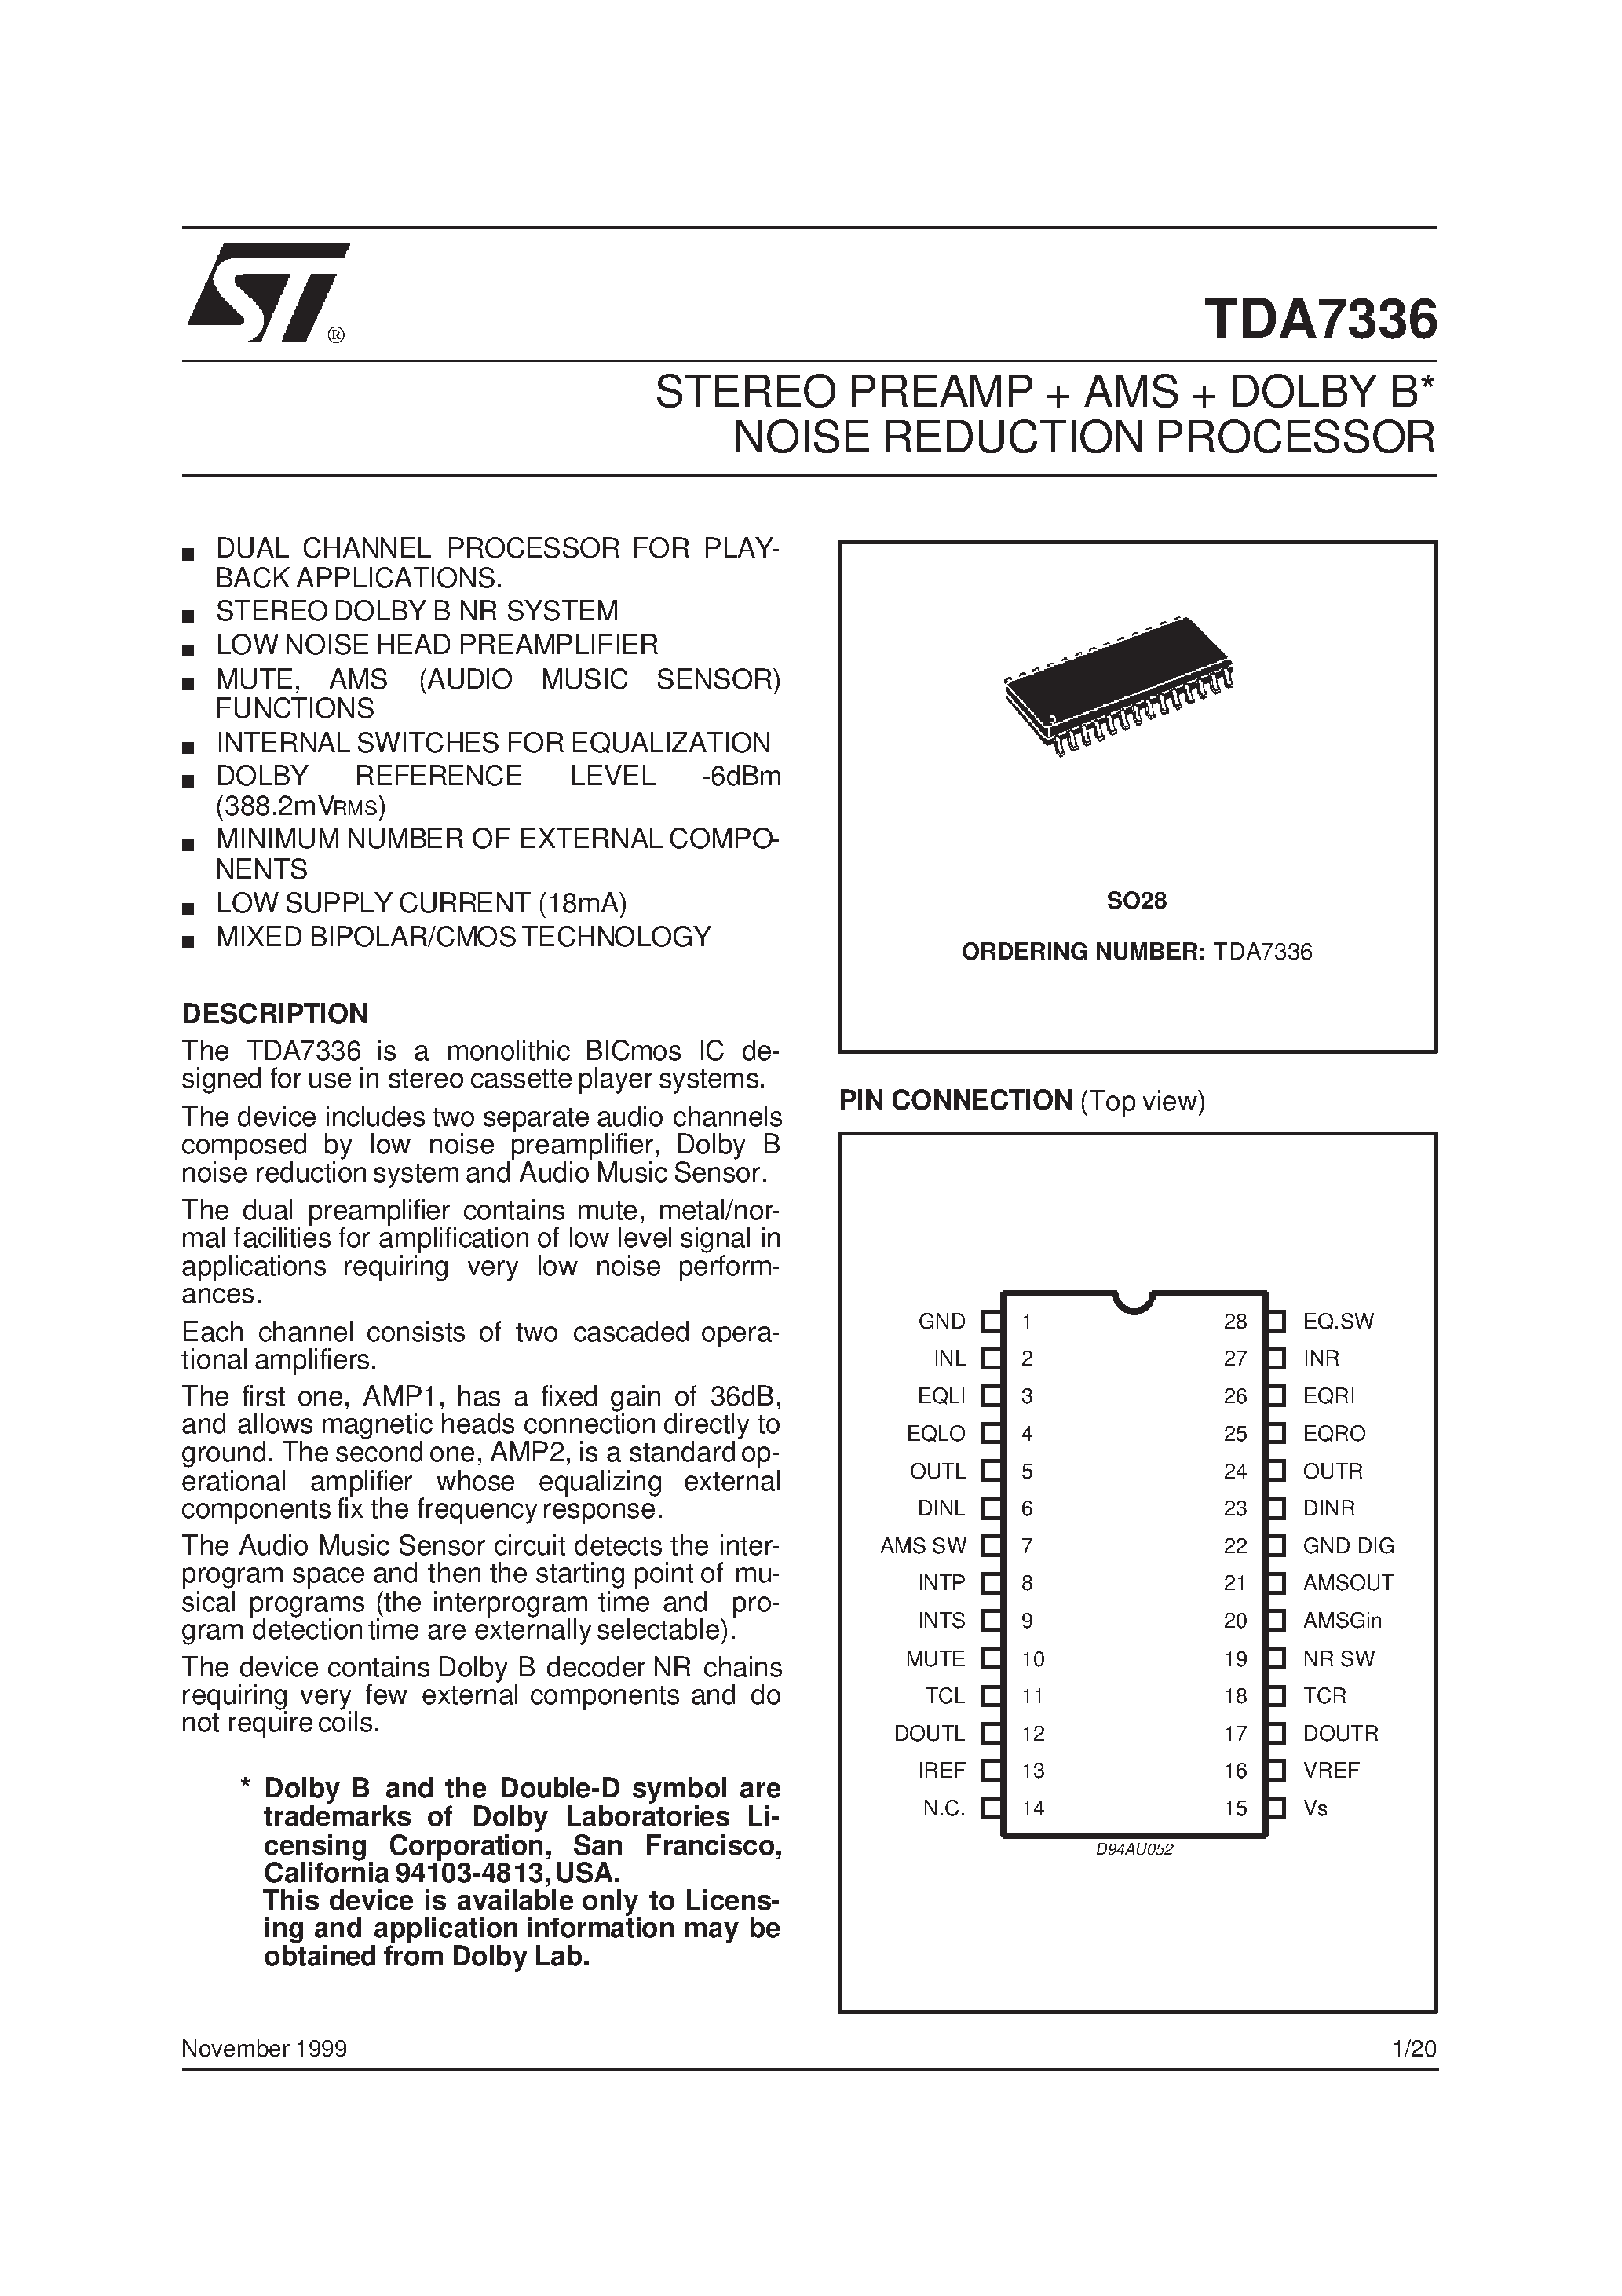 Datasheet TDA7336 - STEREO PREAMP+ AMS+ DOLBY B* NOISE REDUCTION PROCESSOR page 1